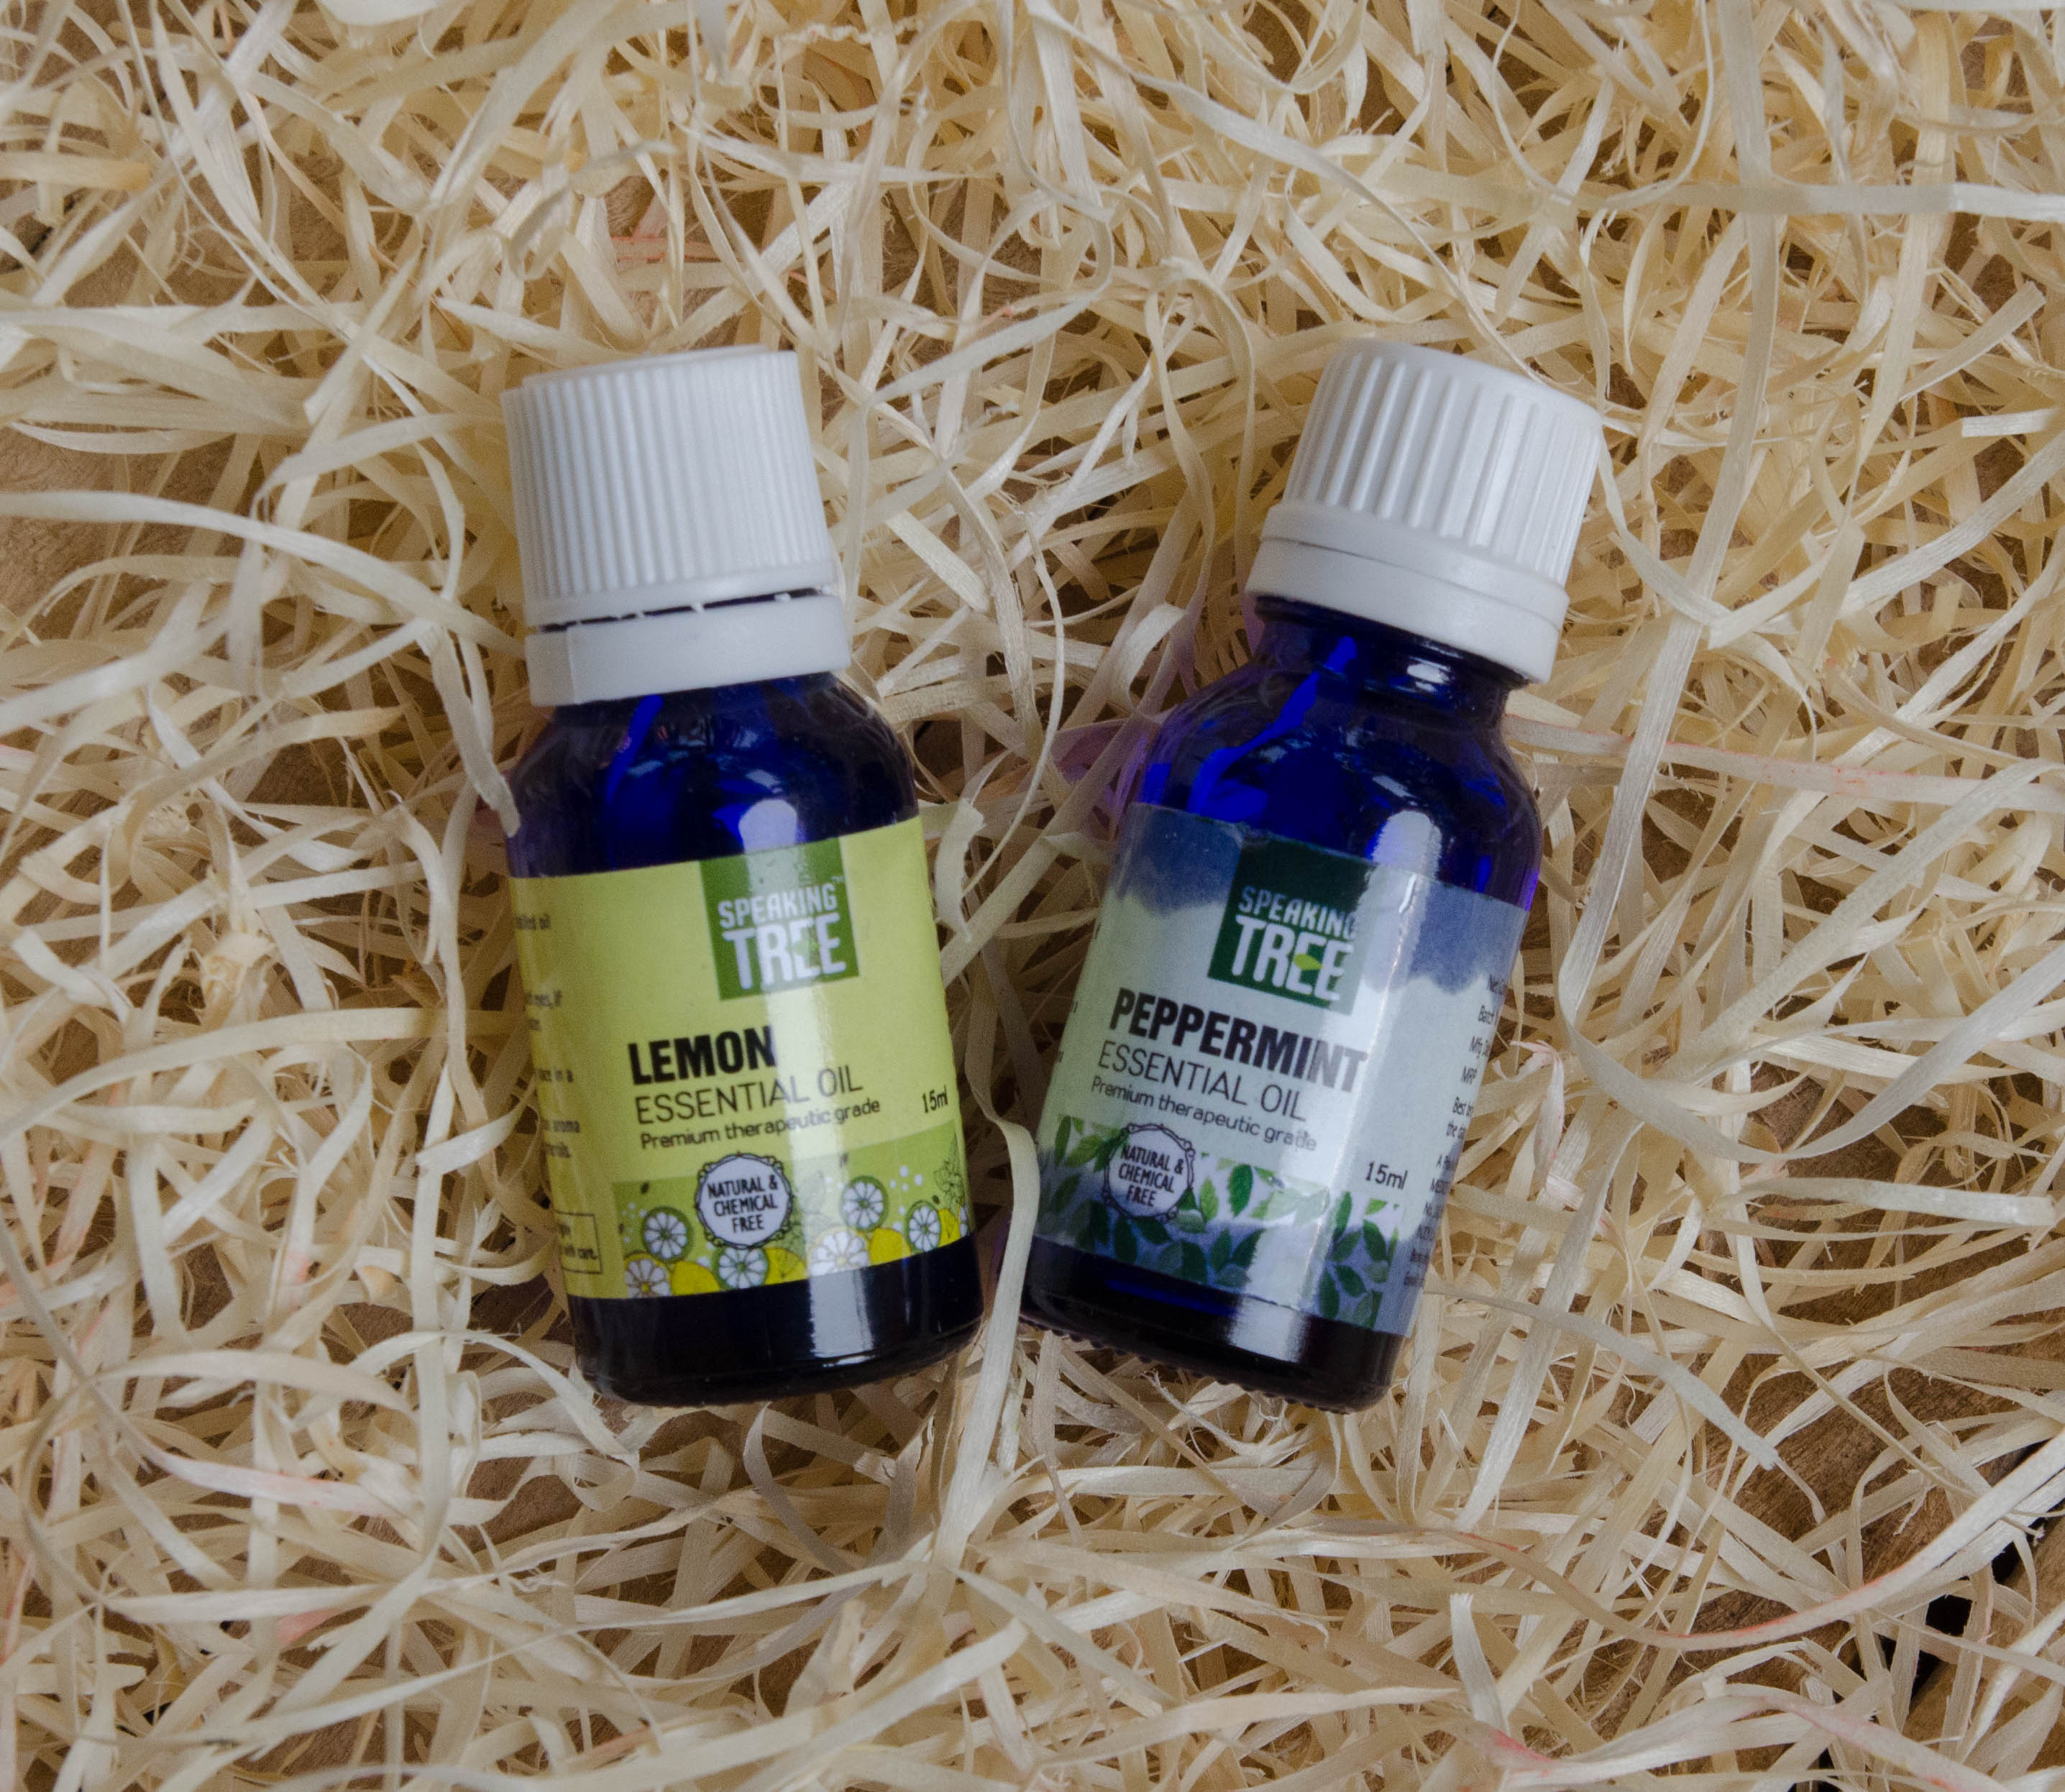 Speaking Tree Essential Oils- Peppermint & Lemon | Benefits, Uses, Review